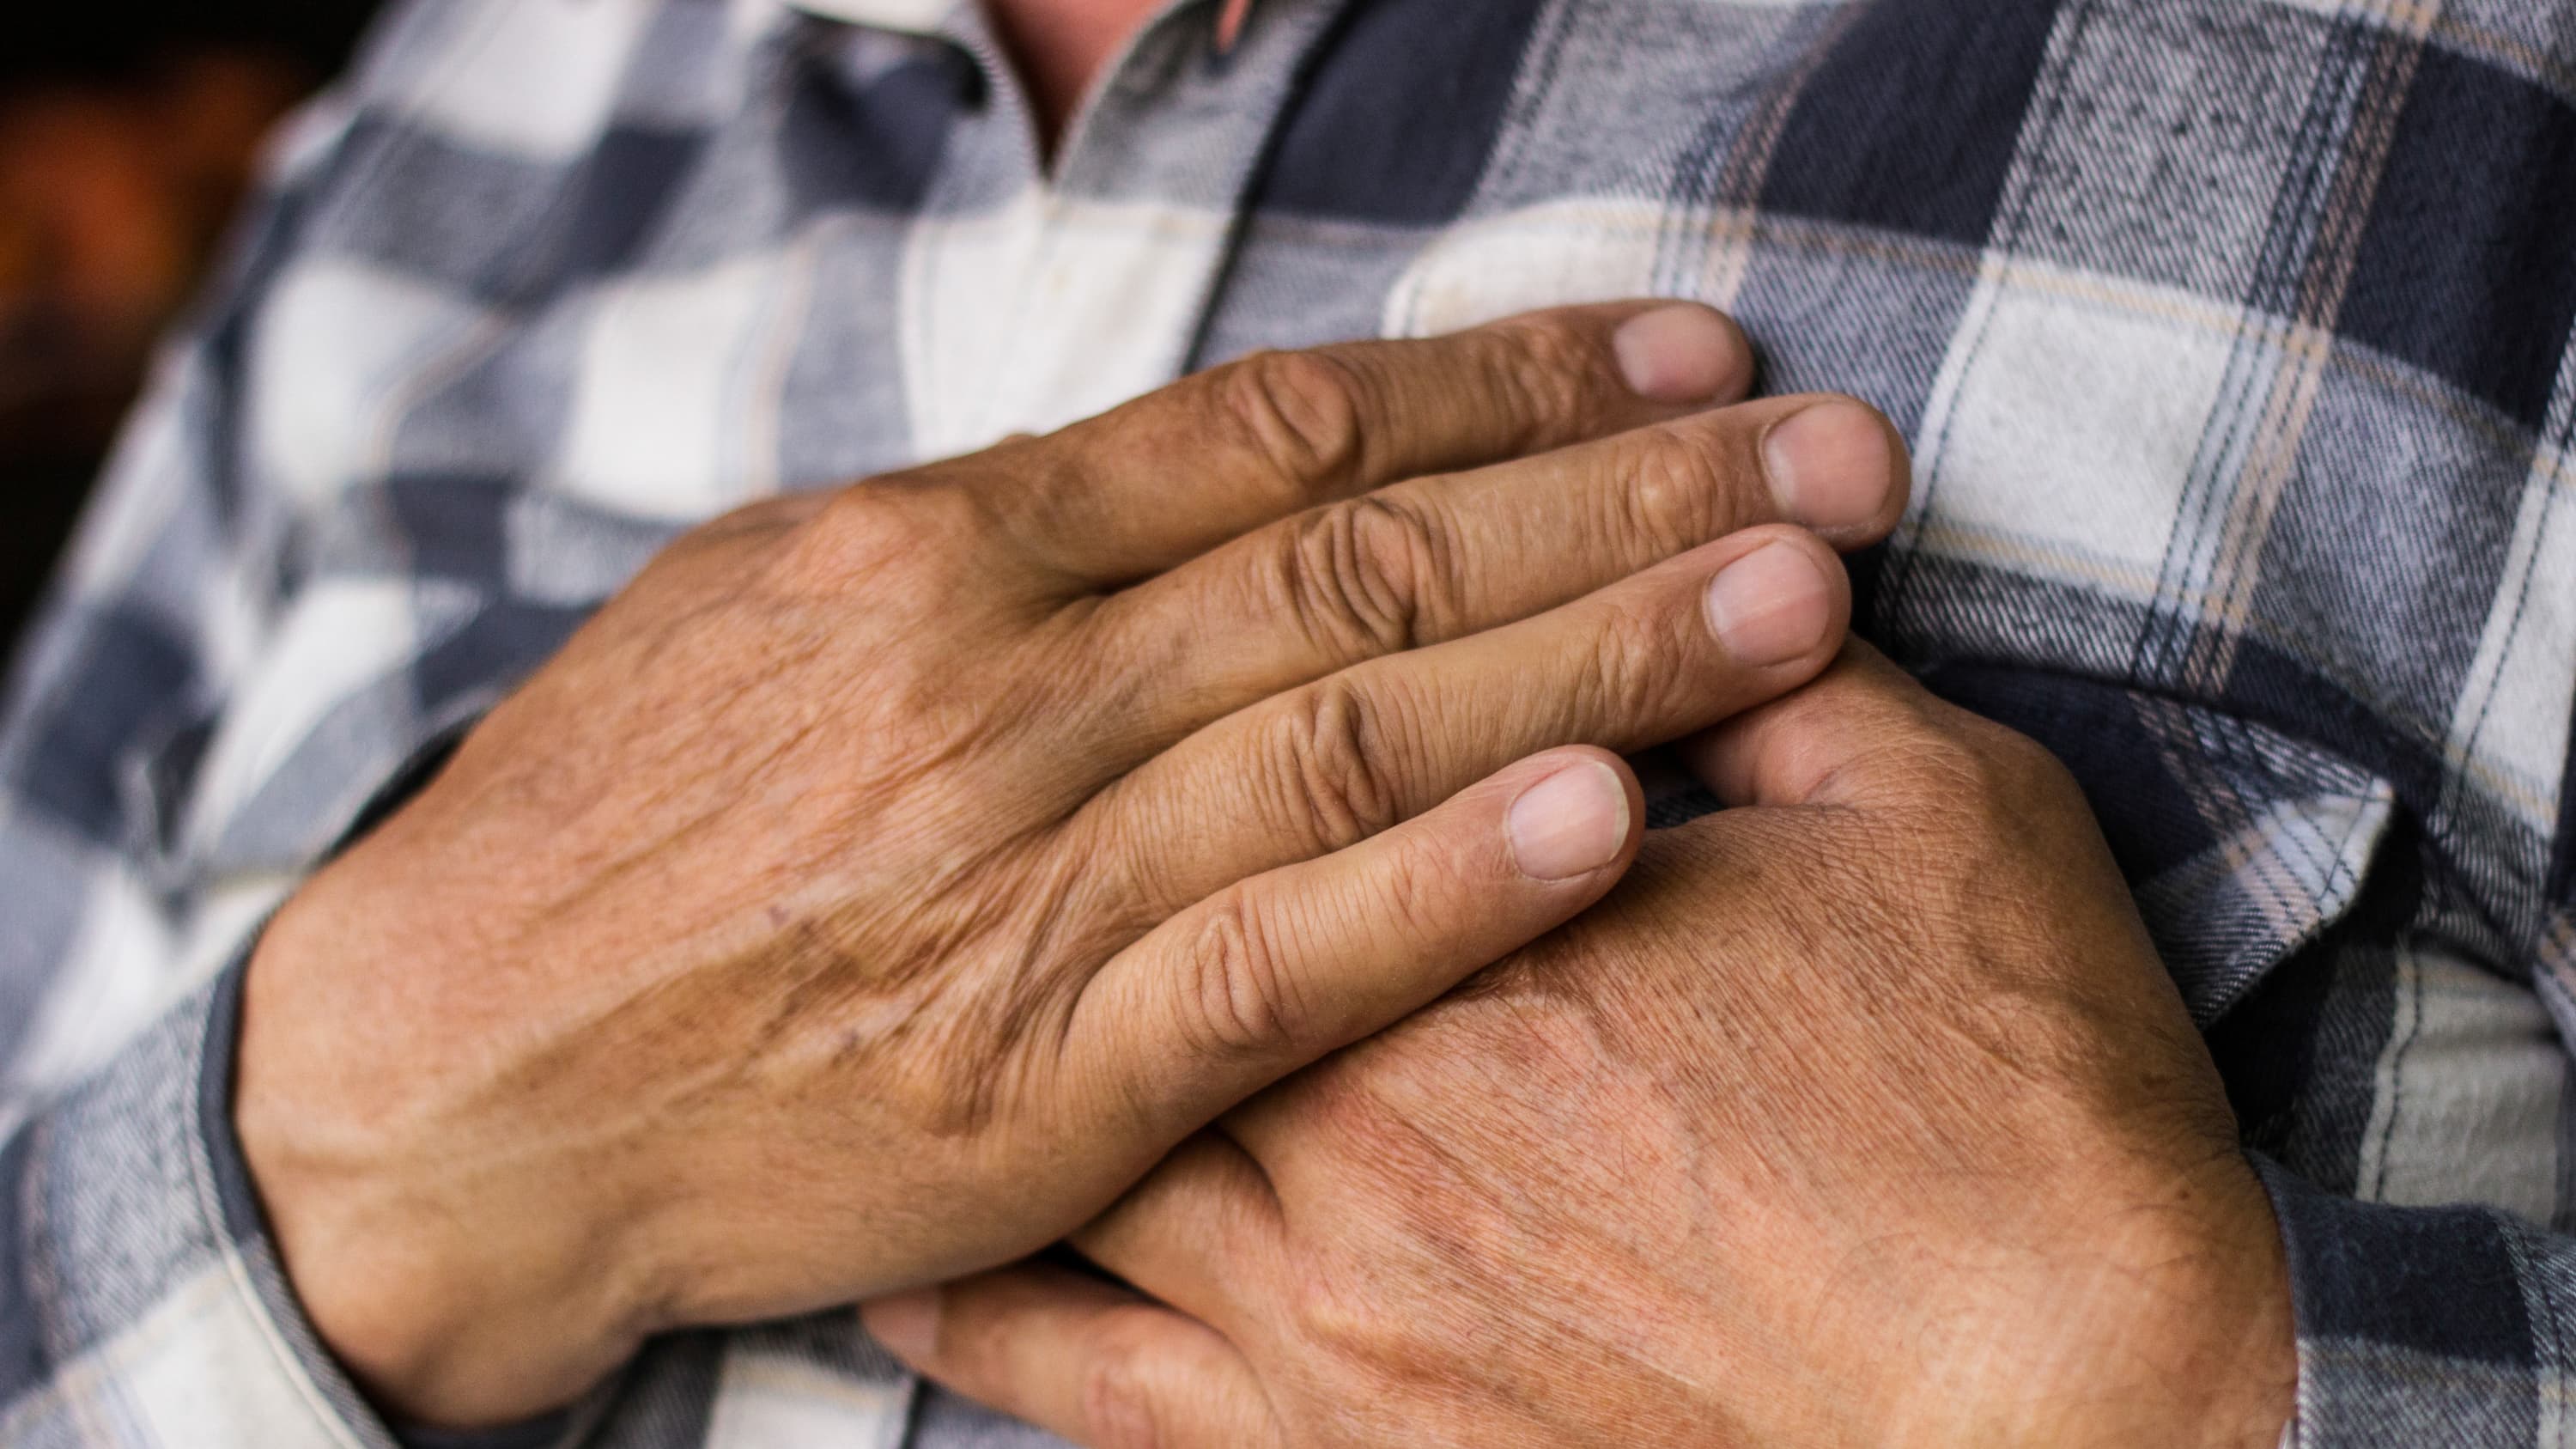 An elderly man clutches his chest in response to pain that could be a sign of a heart attack.